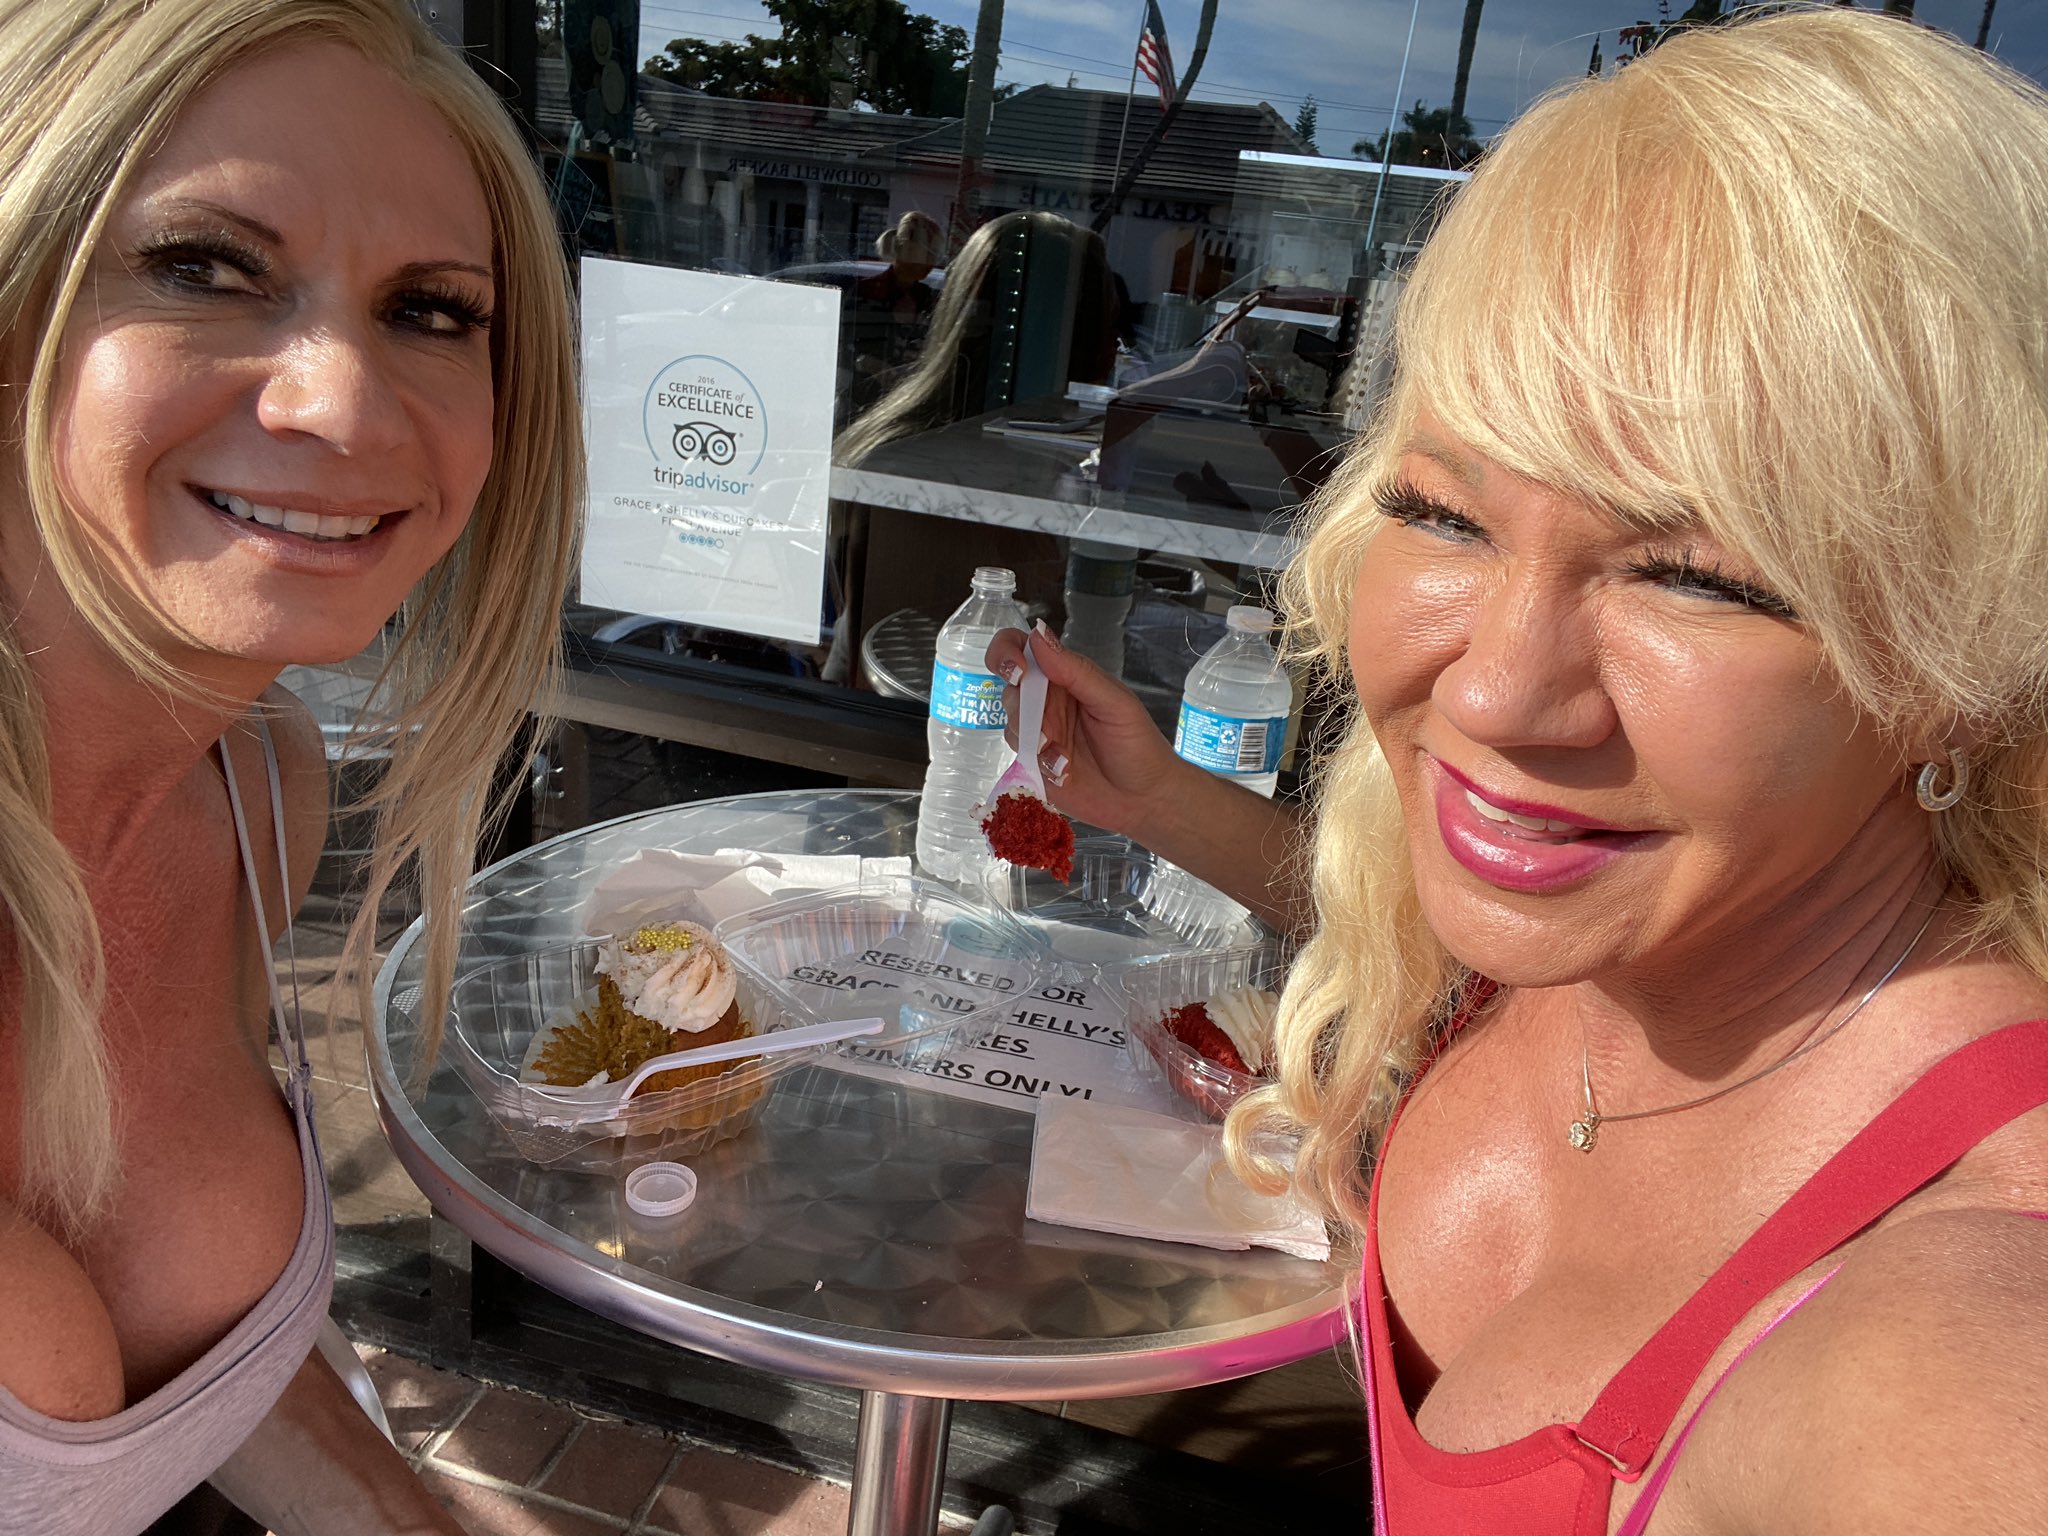 Happy Thursday everyone from Naples. Juliette and I are cheating today and enjoying our cupcake after